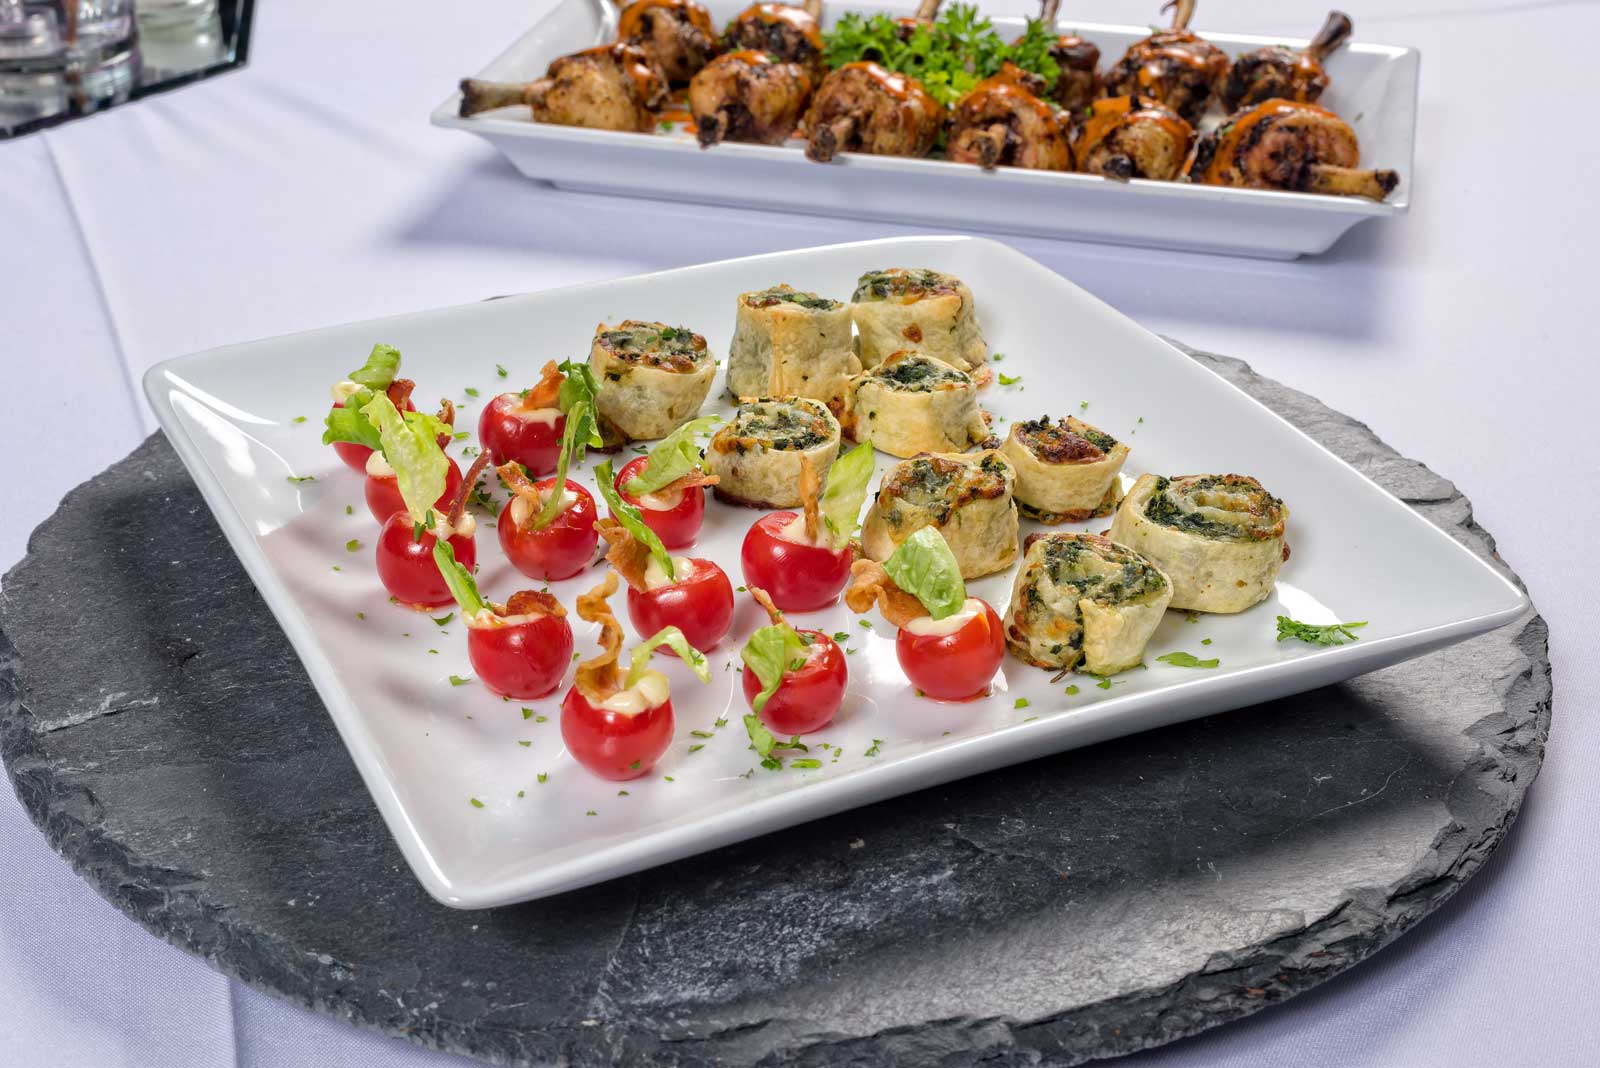 Catering by Norris delivers amazing, creative appetizers and hor d'oeuvres for parties, weddings, dinners and all social occasions